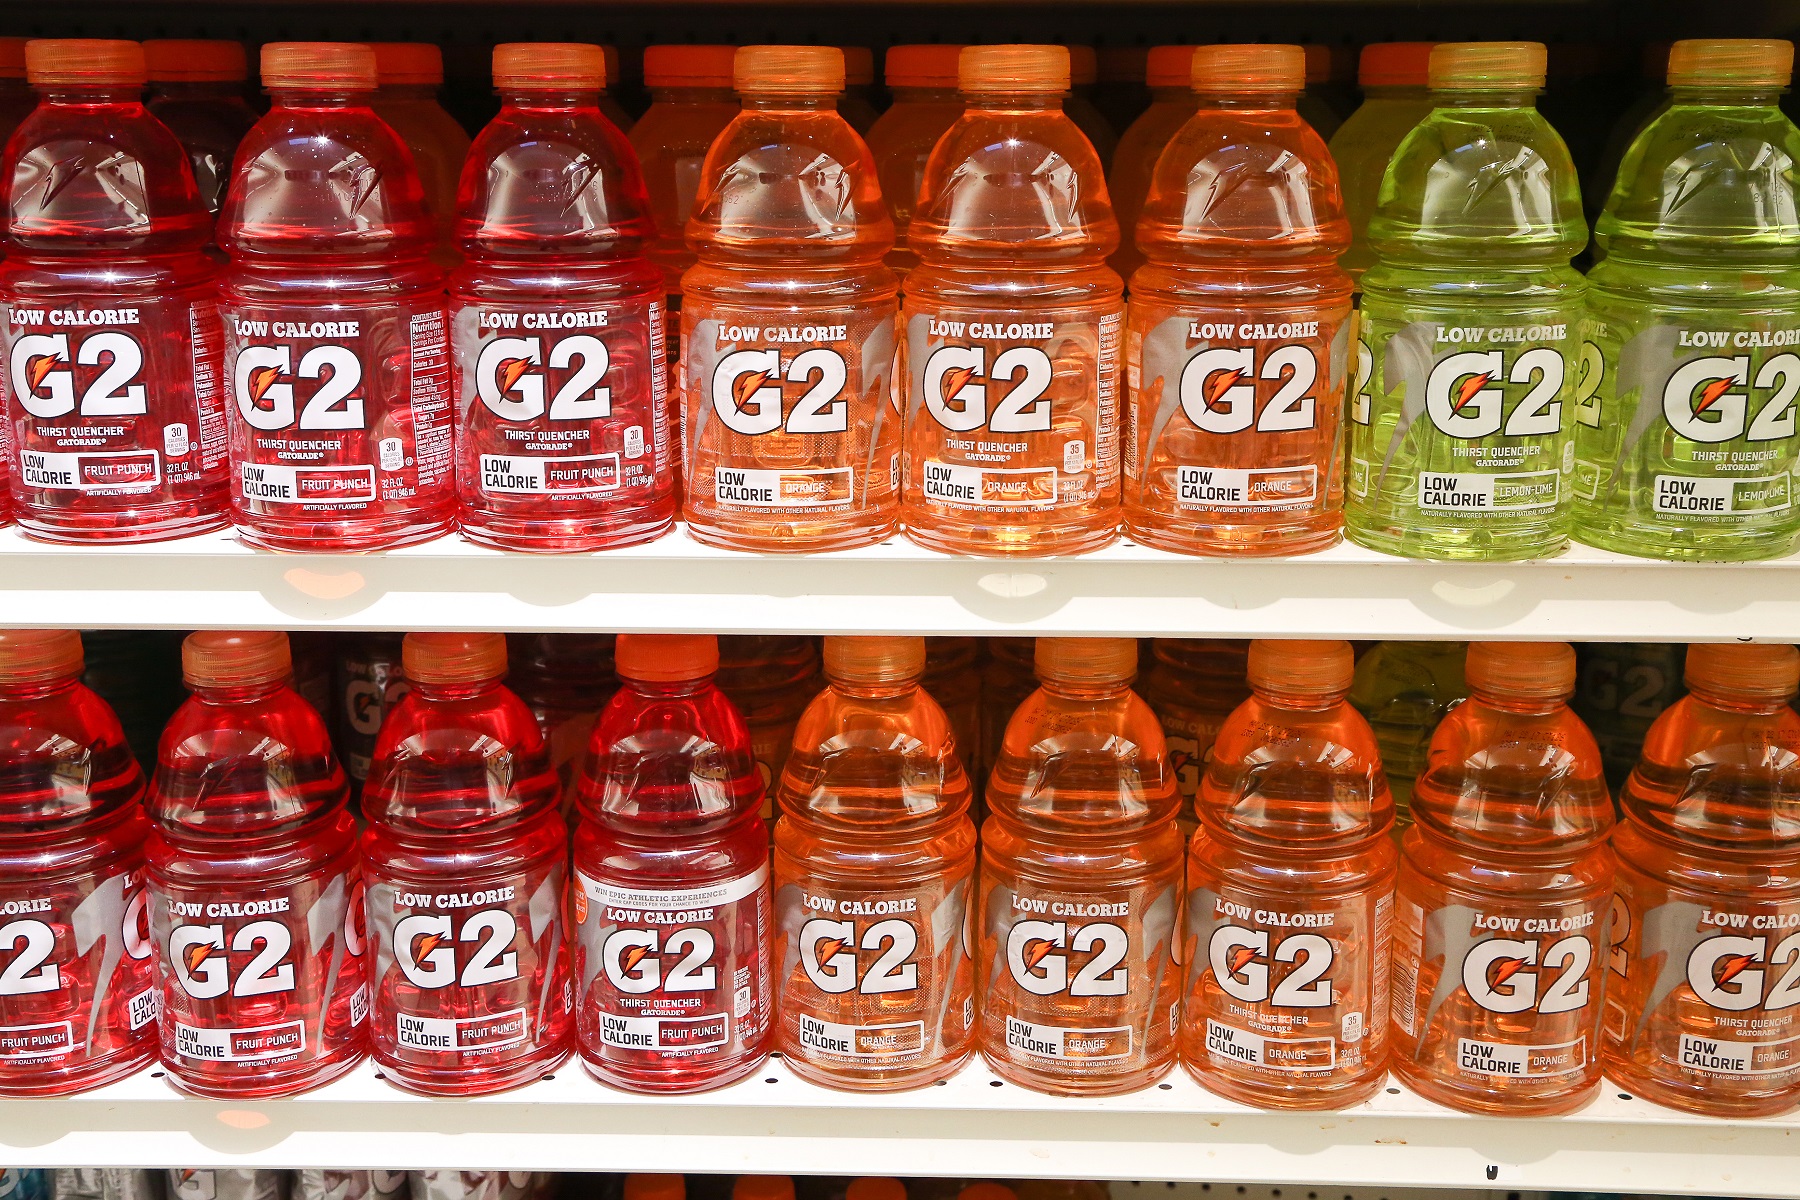 https://www.beveragedaily.com/var/wrbm_gb_food_pharma/storage/images/publications/food-beverage-nutrition/beveragedaily.com/article/2021/03/25/gatorade-powerade-bodyarmor-how-pepsico-and-coca-cola-are-playing-in-the-sports-drink-category/12297600-9-eng-GB/Gatorade-Powerade-BodyArmor-How-PepsiCo-and-Coca-Cola-are-playing-in-the-sports-drink-category.jpg